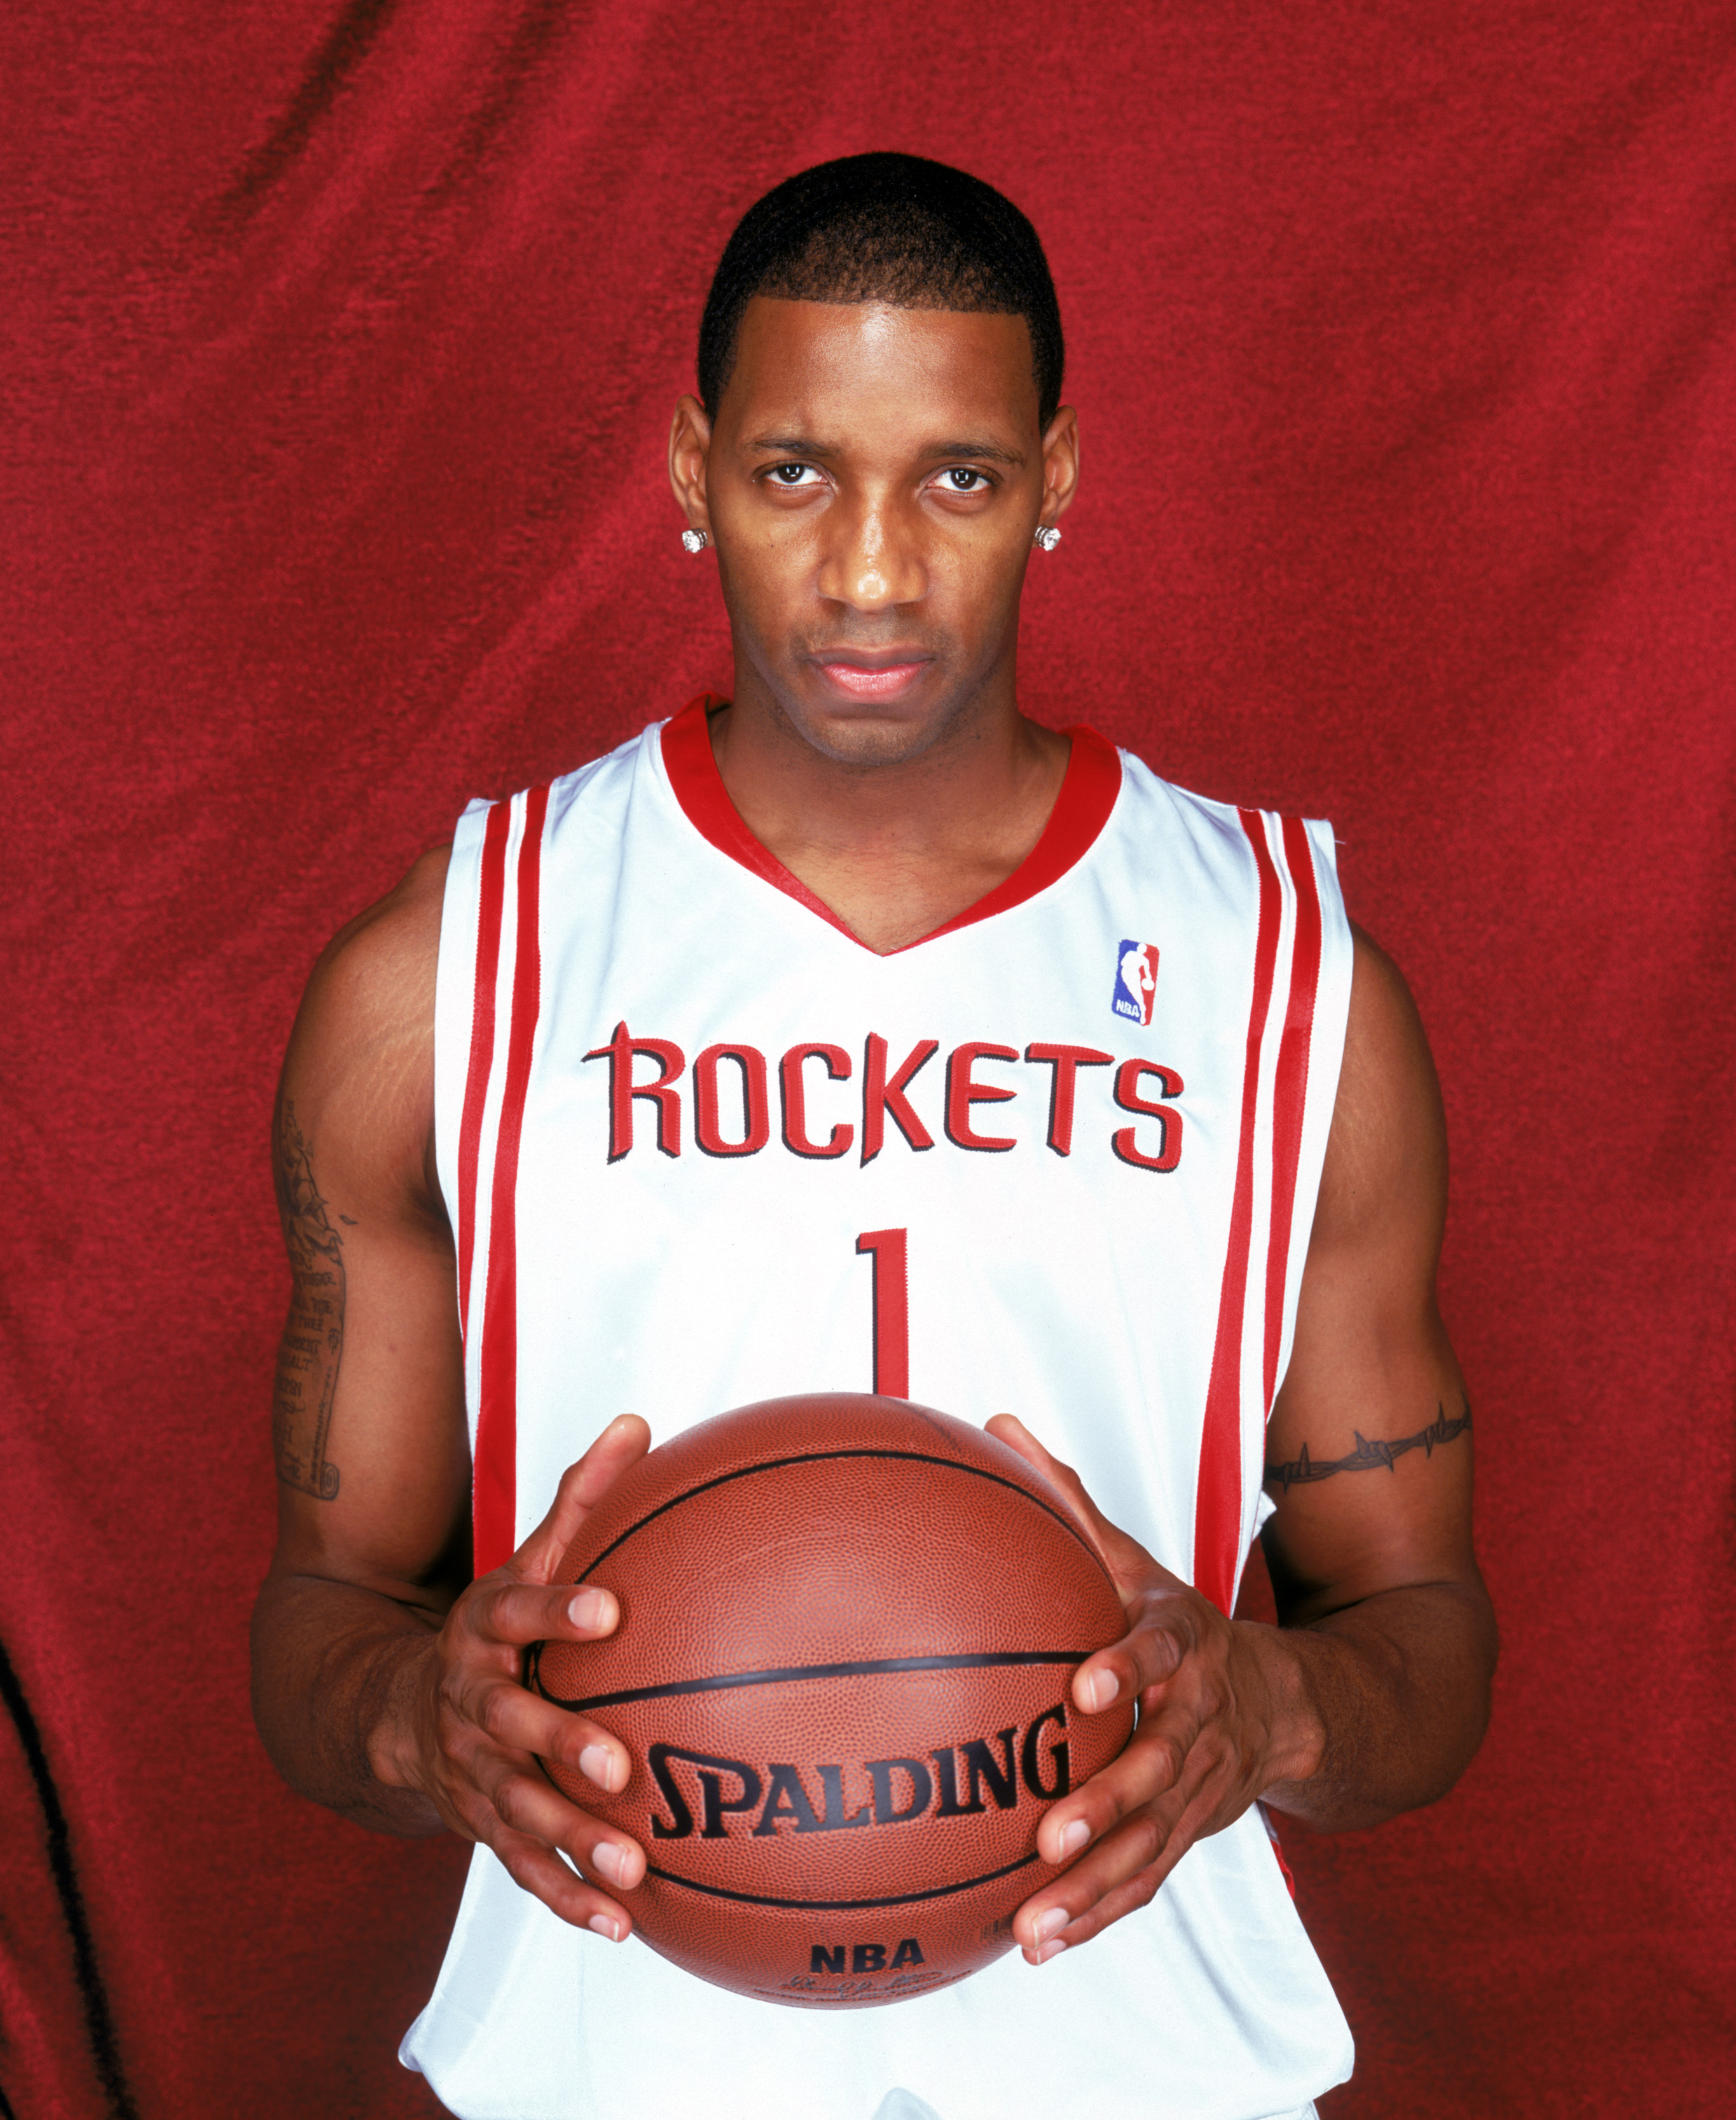 Tracy Mcgrady Retires After An Illustrious Underrated Nba Career Superstartickets Com